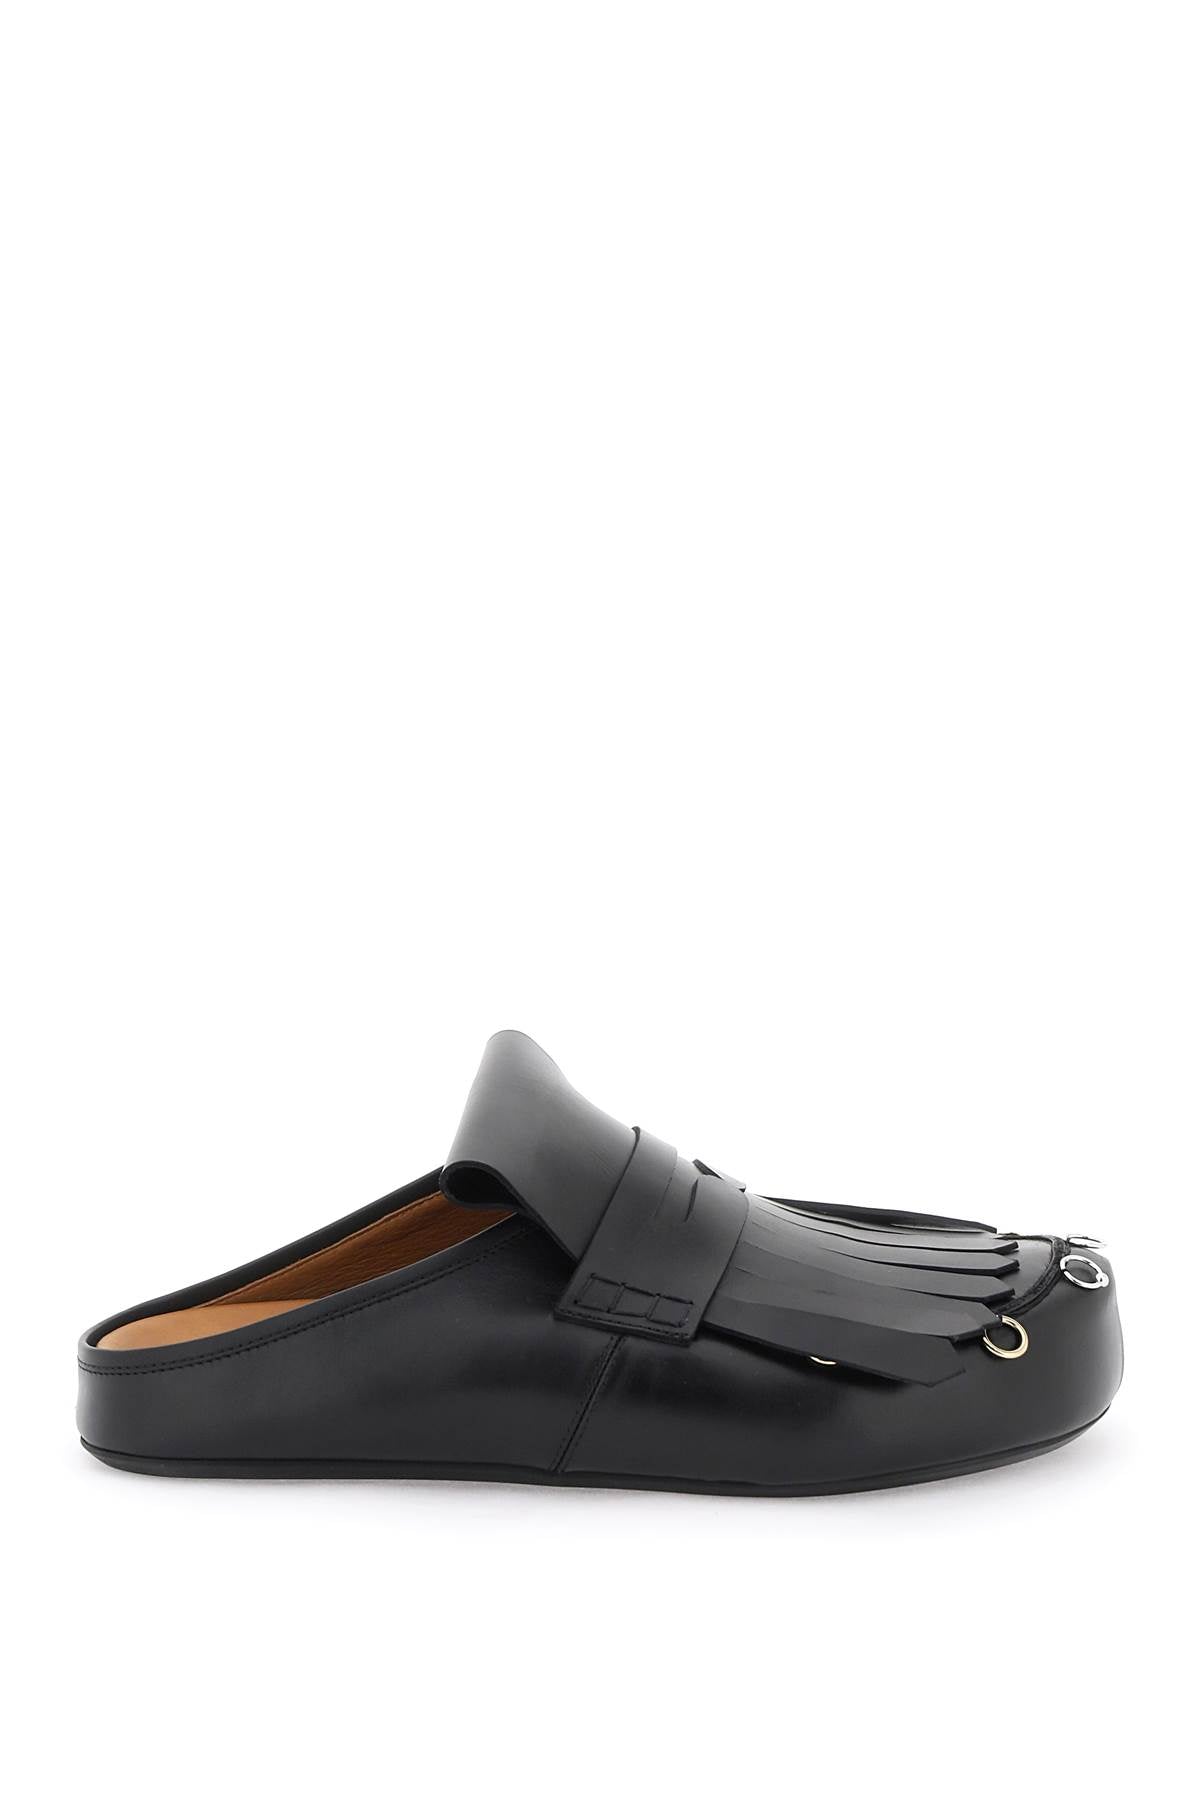 Marni Marni leather clogs with bangs and piercings